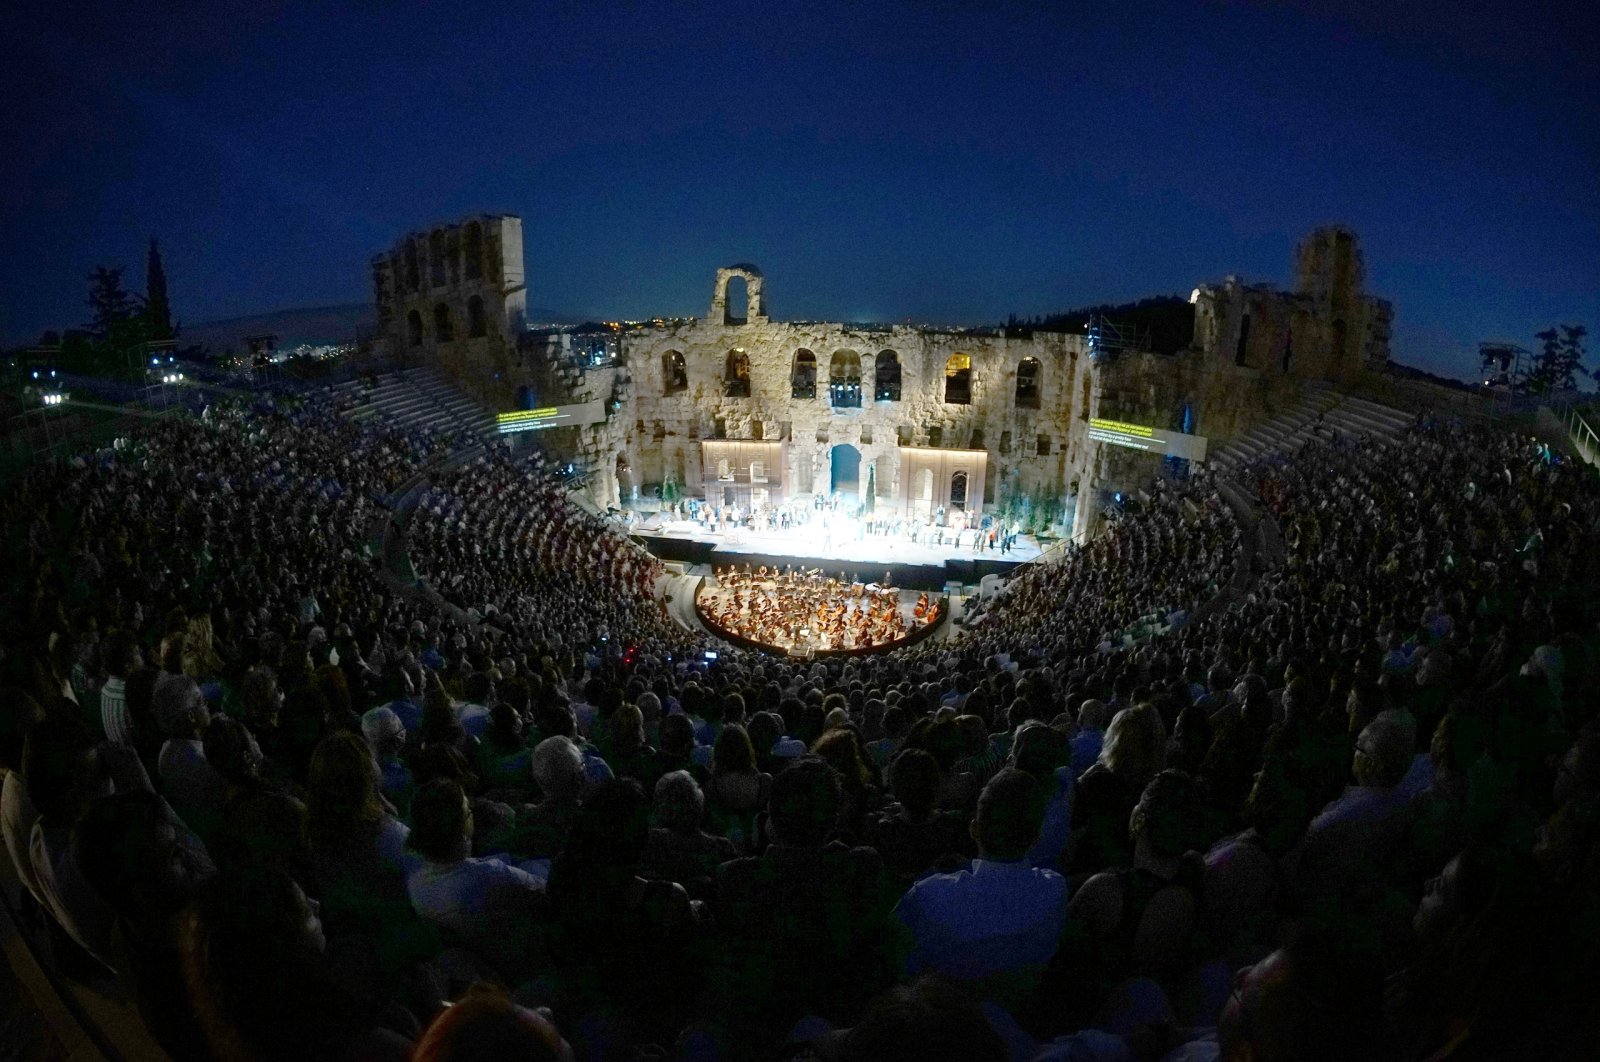 For the first time since the pandemic, thousands of opera enthusiasts were able to enjoy a performance at the ancient Herodion amphitheater below the Acropolis in Athens. (DPA)